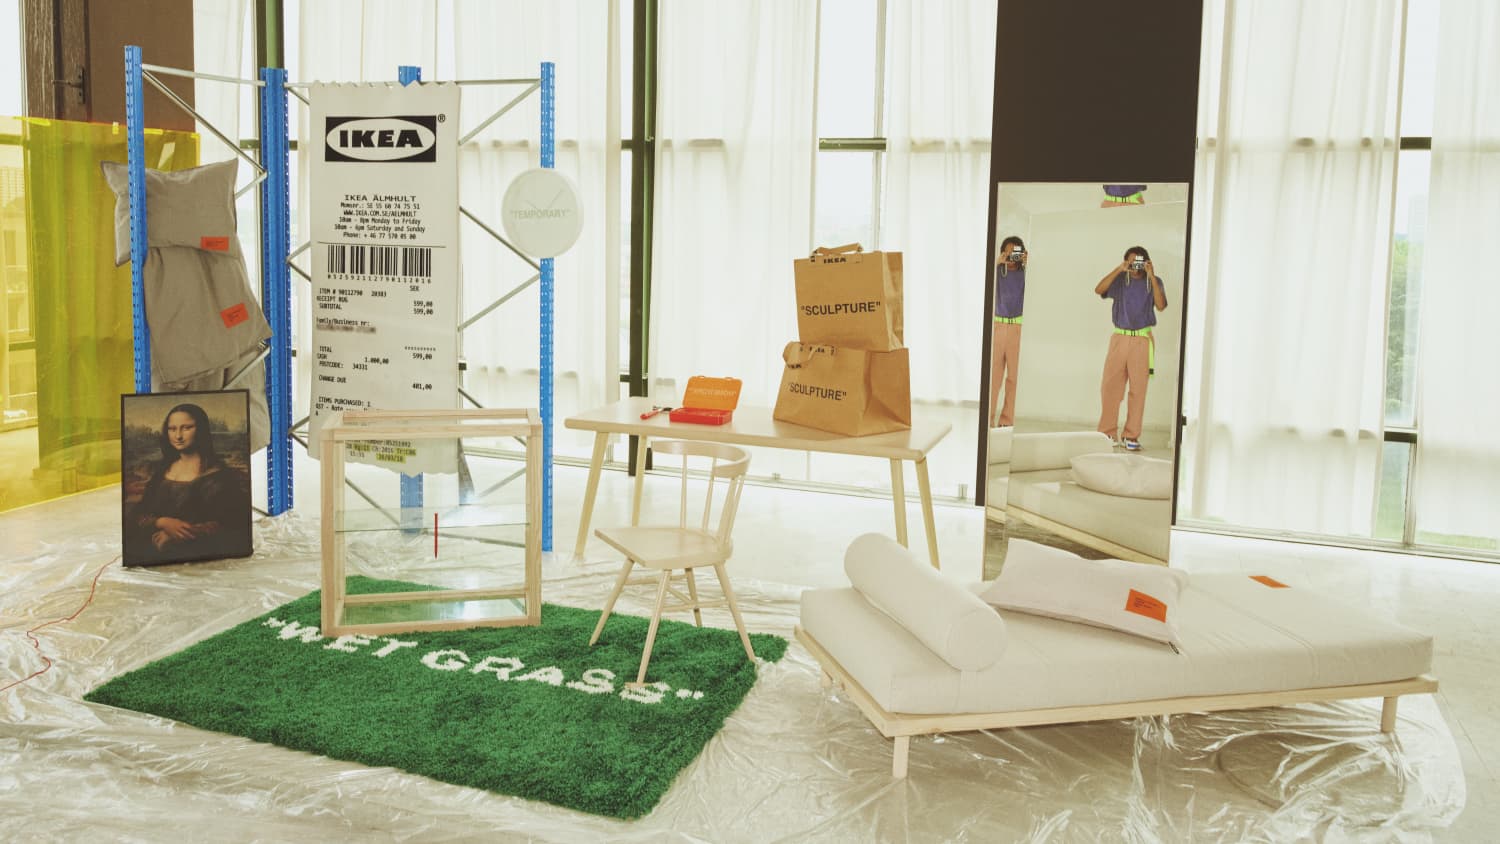 OFF-WHITE x IKEA, the complete collection with all the details